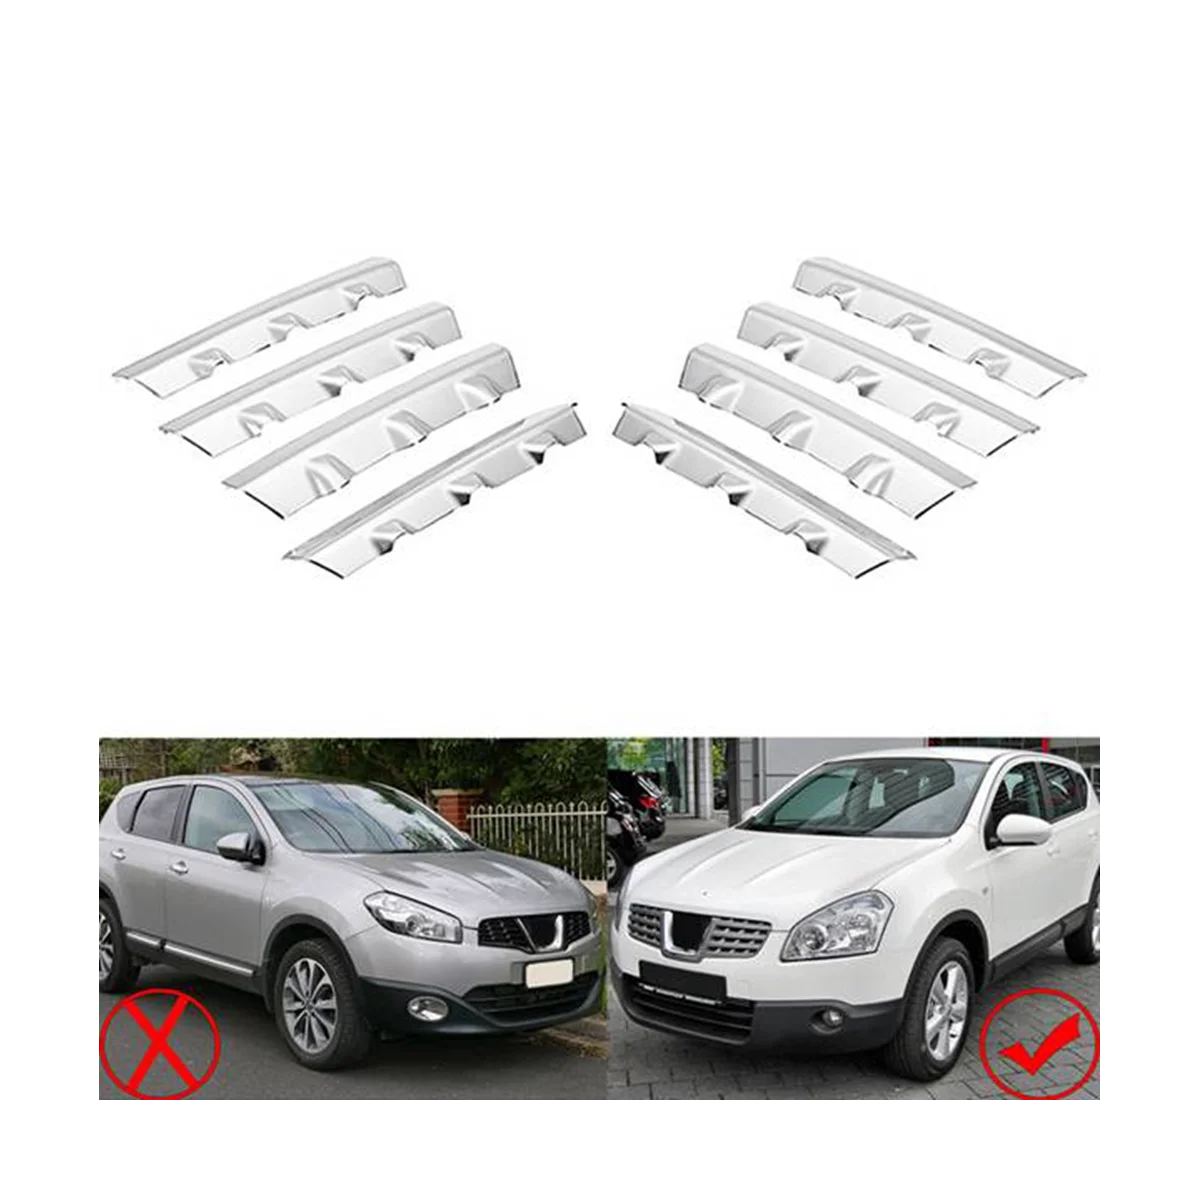 

Car Chrome Front Grille Trim Cover Front Center Grill Trims Fit for Nissan Qashqai J10 2008-2011 Car Styling